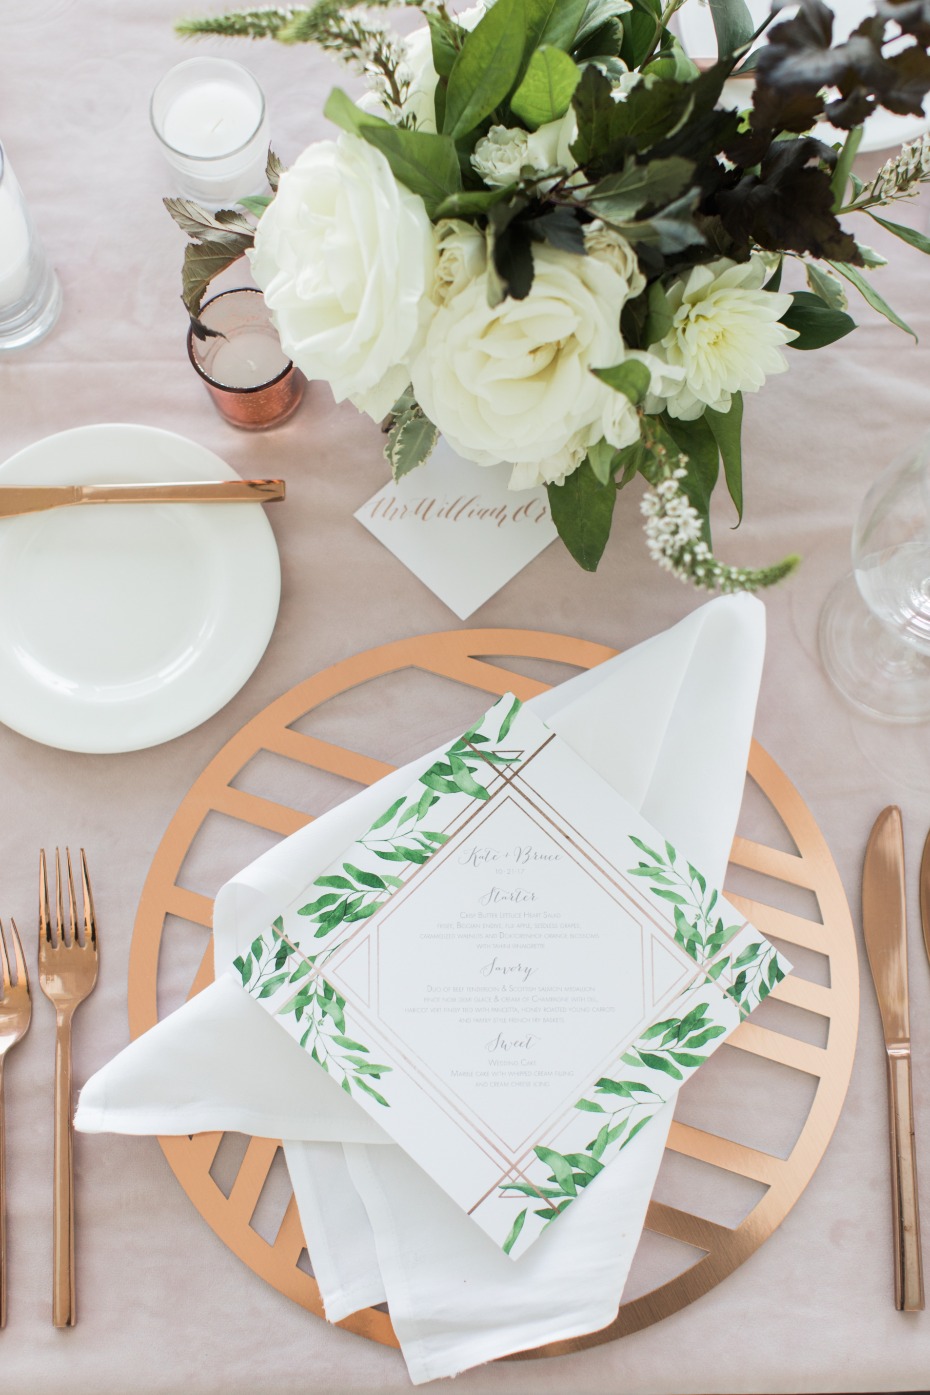 White, green and rose gold table setting